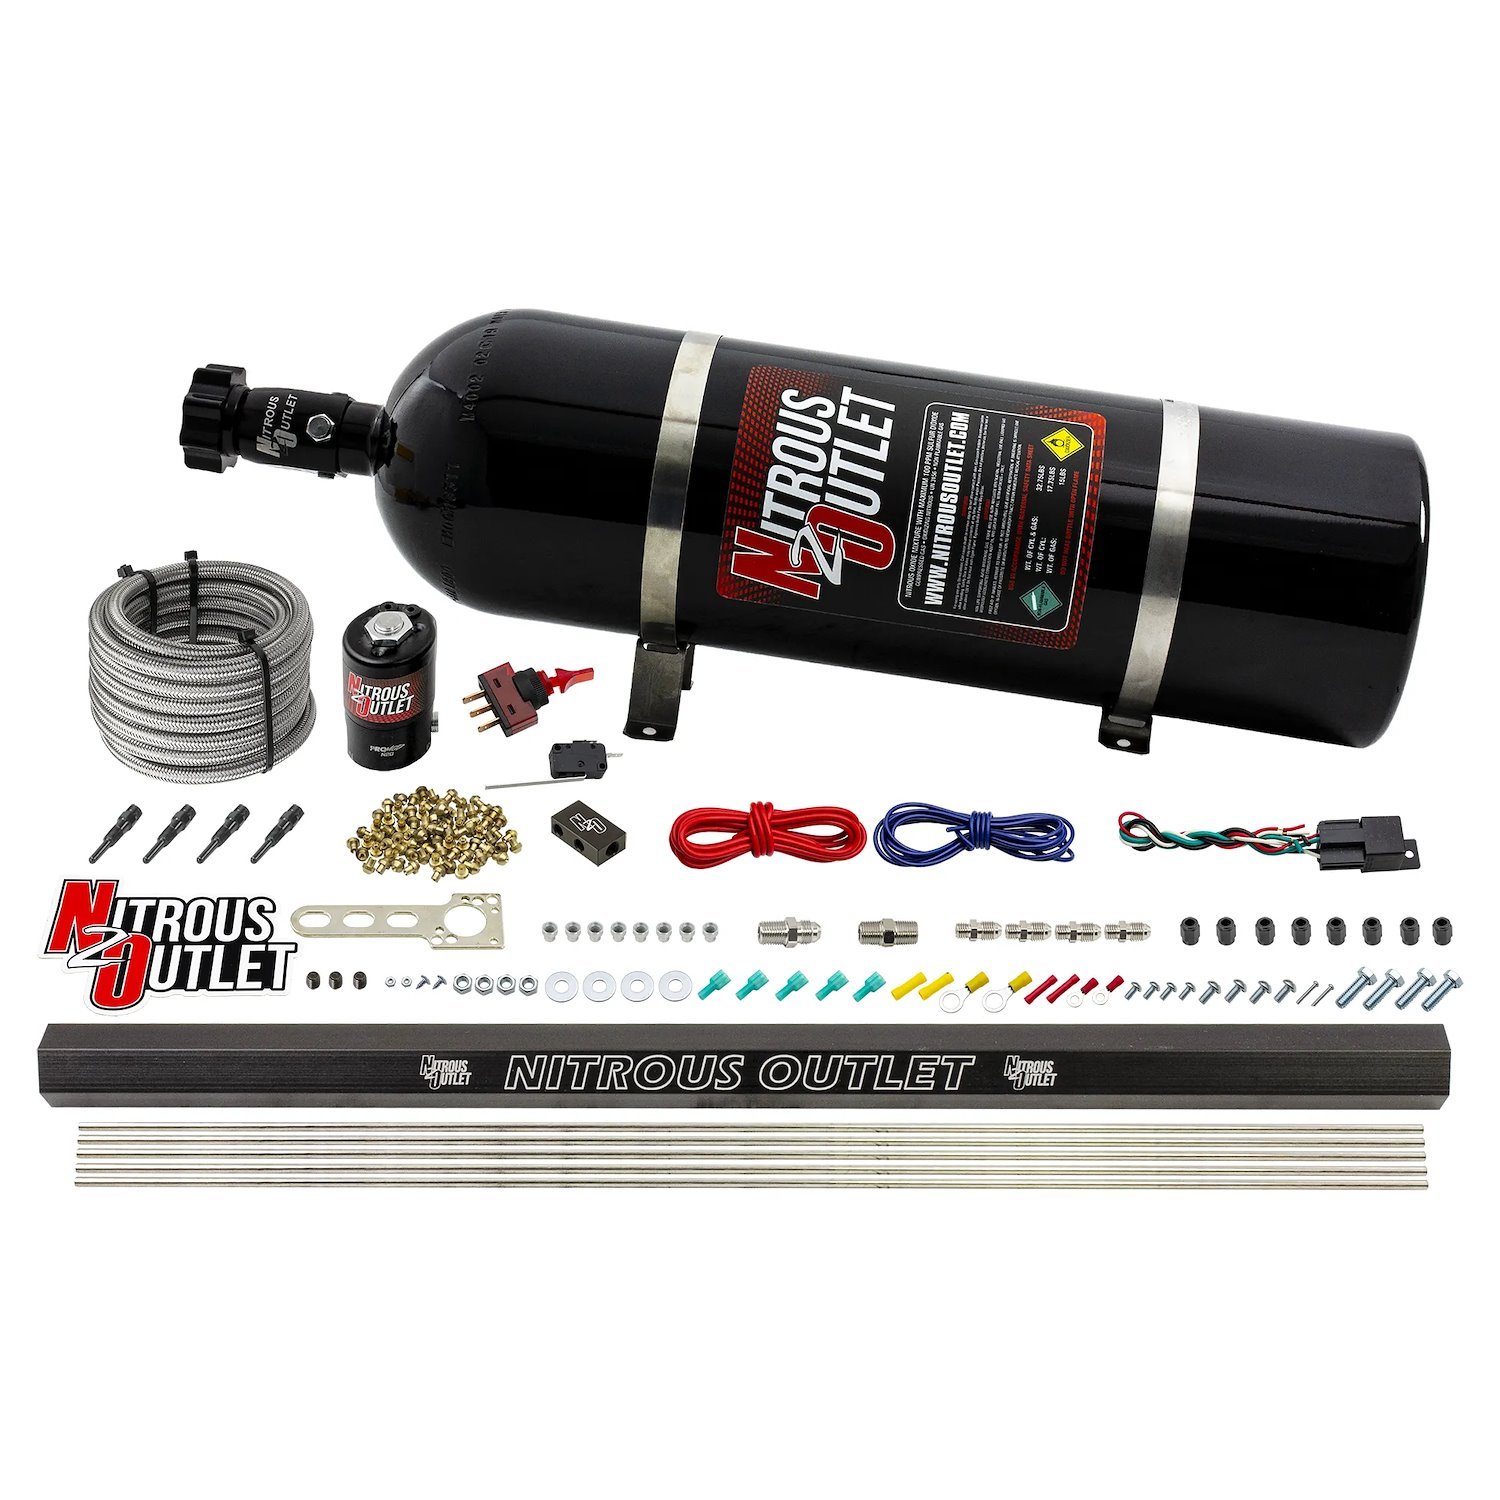 00-10361-15 Dry 4-Cyl Direct Port System, .122 Nitrous Solenoid/Injection Rail/90-Degree Discharge Nozzles, 50-250HP, 15lb